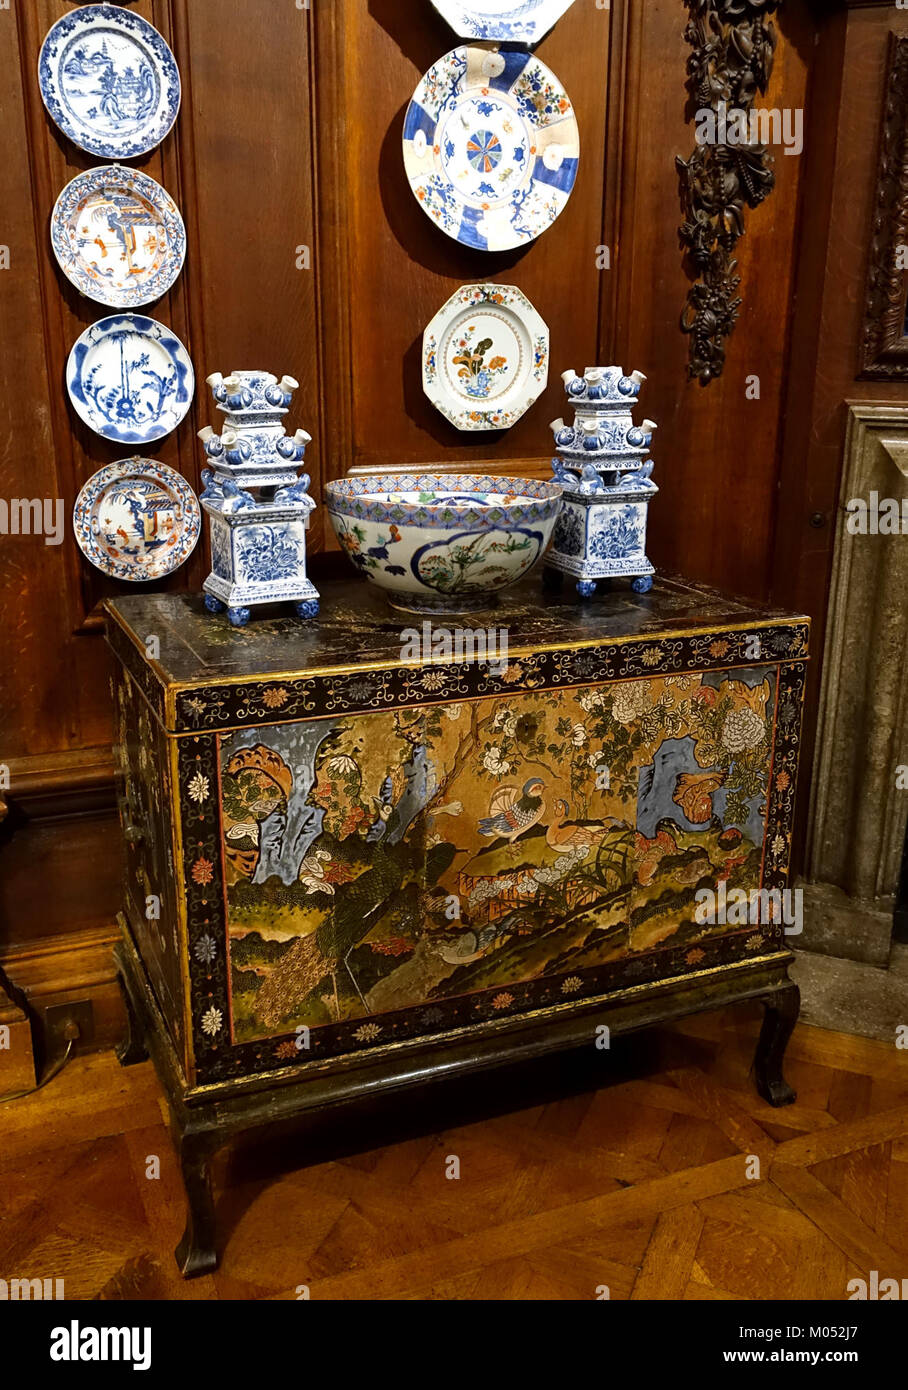 Cabinet of Chinese Coromandel lacquer, with ceramics - State Closet, Chatsworth House - Derbyshire, England - DSC03240 Stock Photo